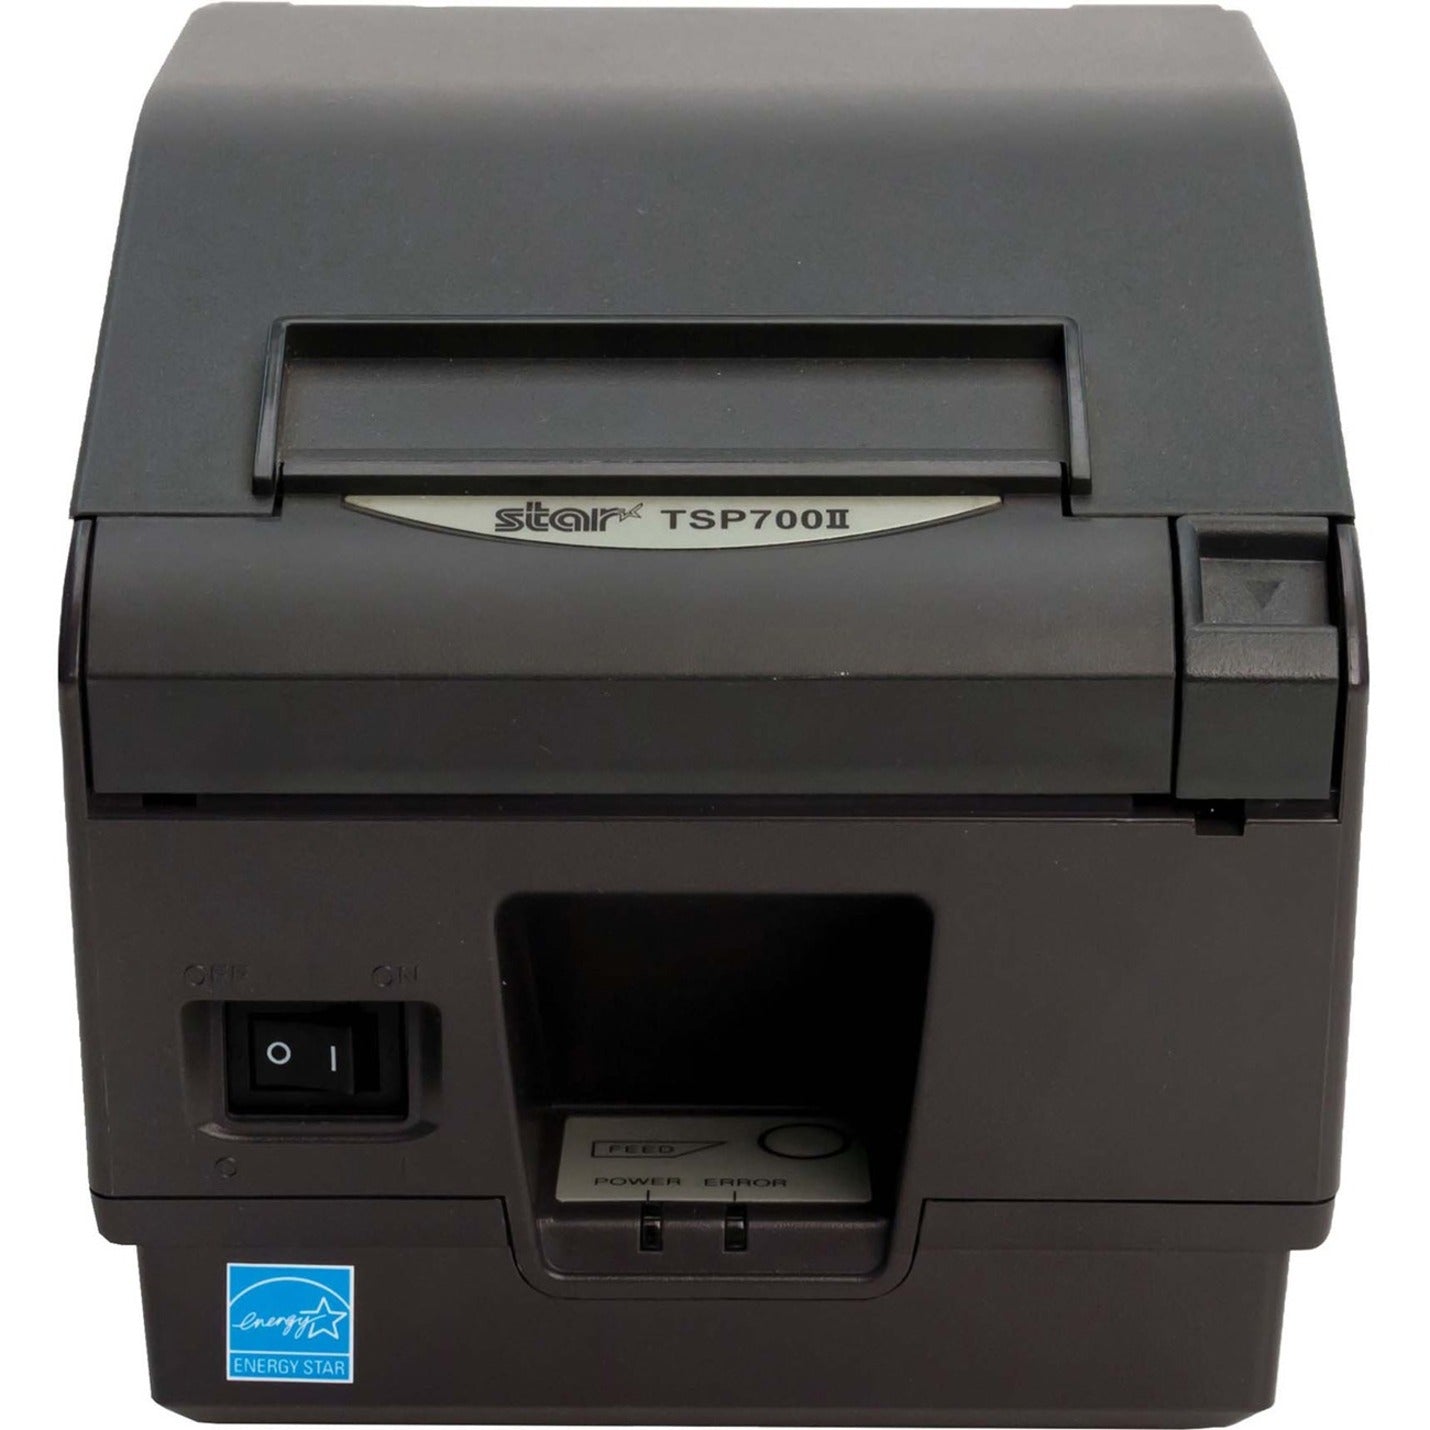 Star Micronics 39442310 TSP743IID GRY POS Thermal Label Printer, Automatic Cutter, 16 MB Flash Memory